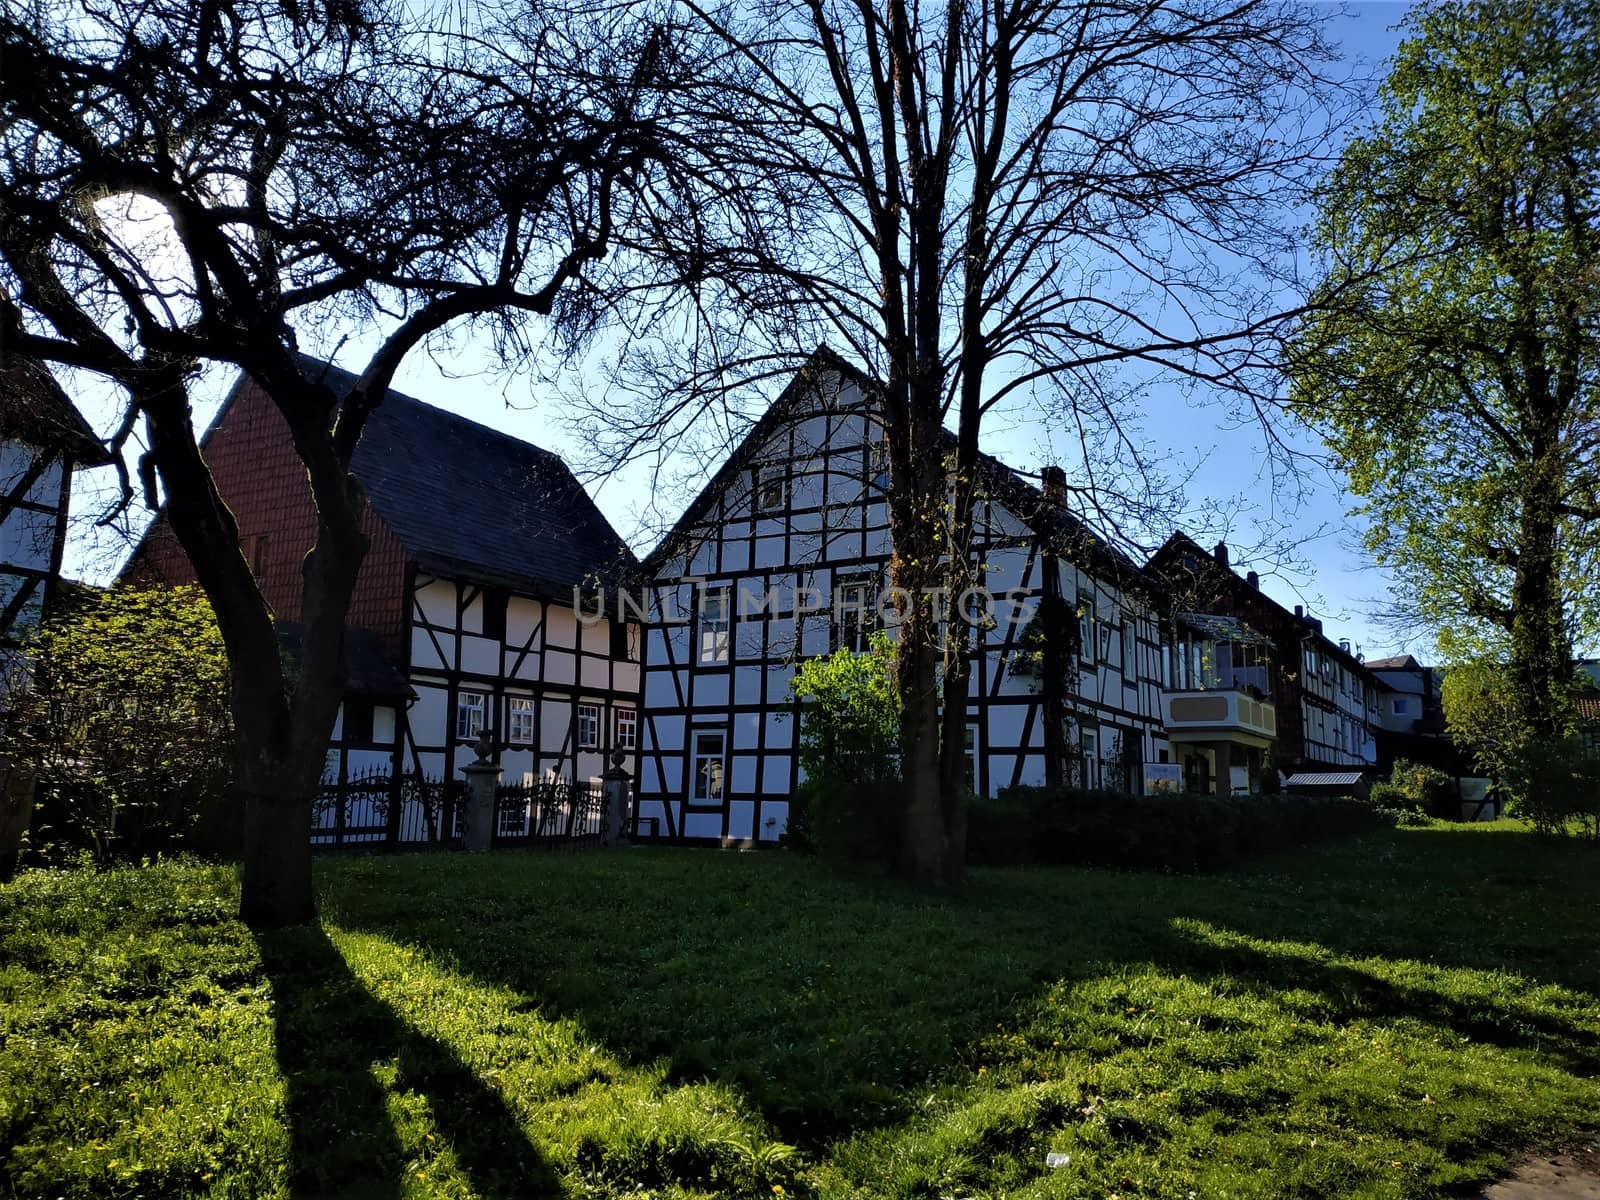 Central park in the city of Einbeck, Germany with half-timbered houses